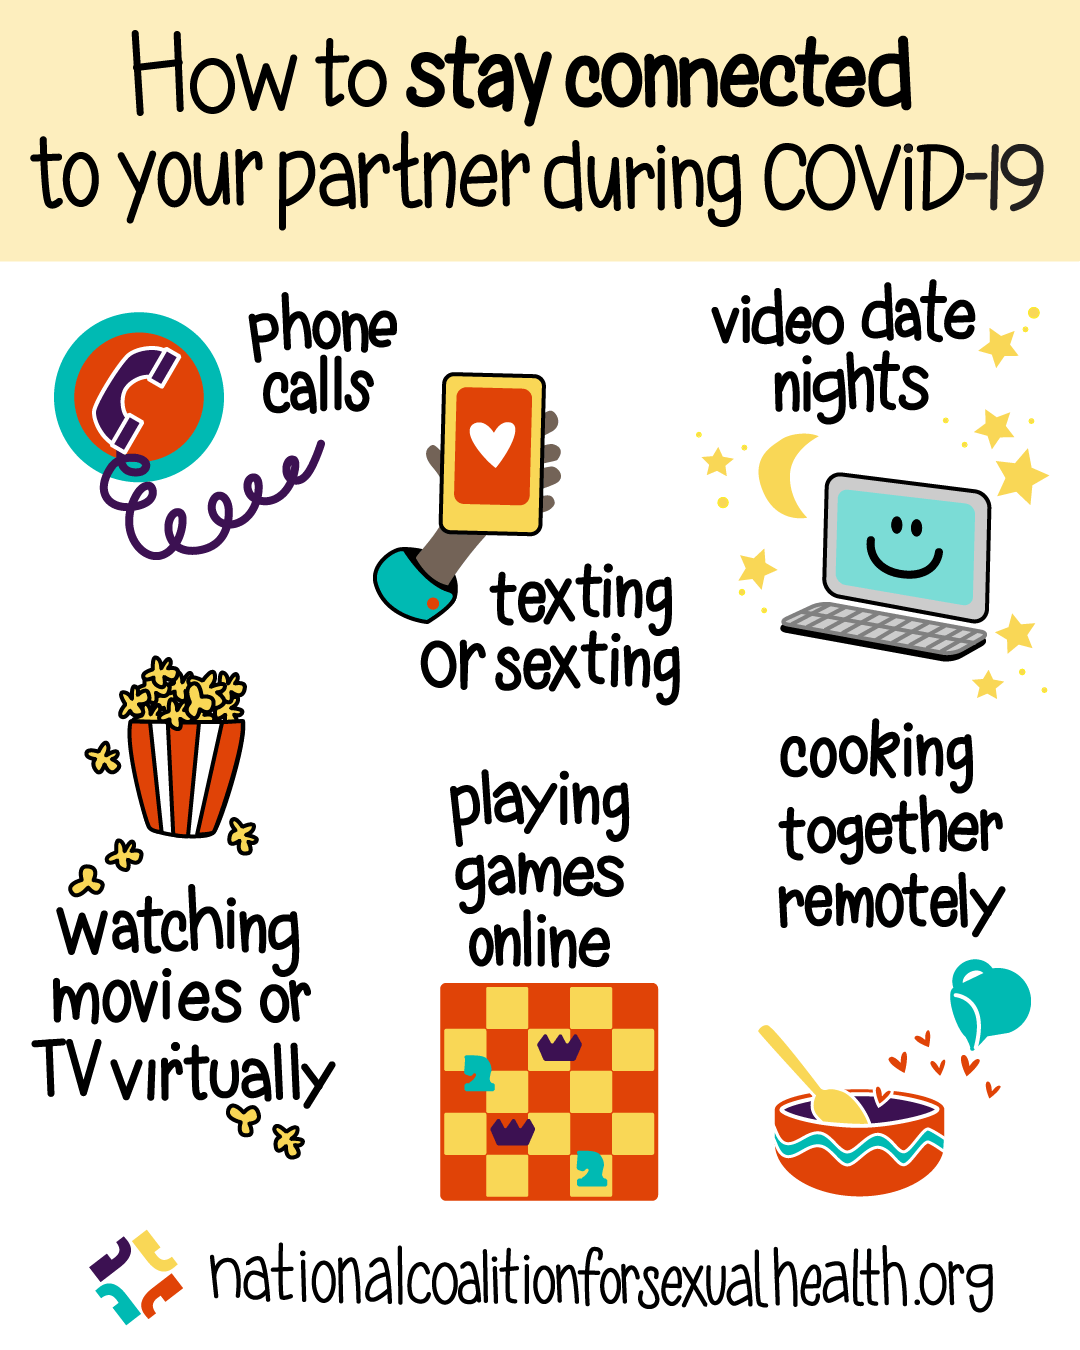 How to stay connected to your partner during COVID-19